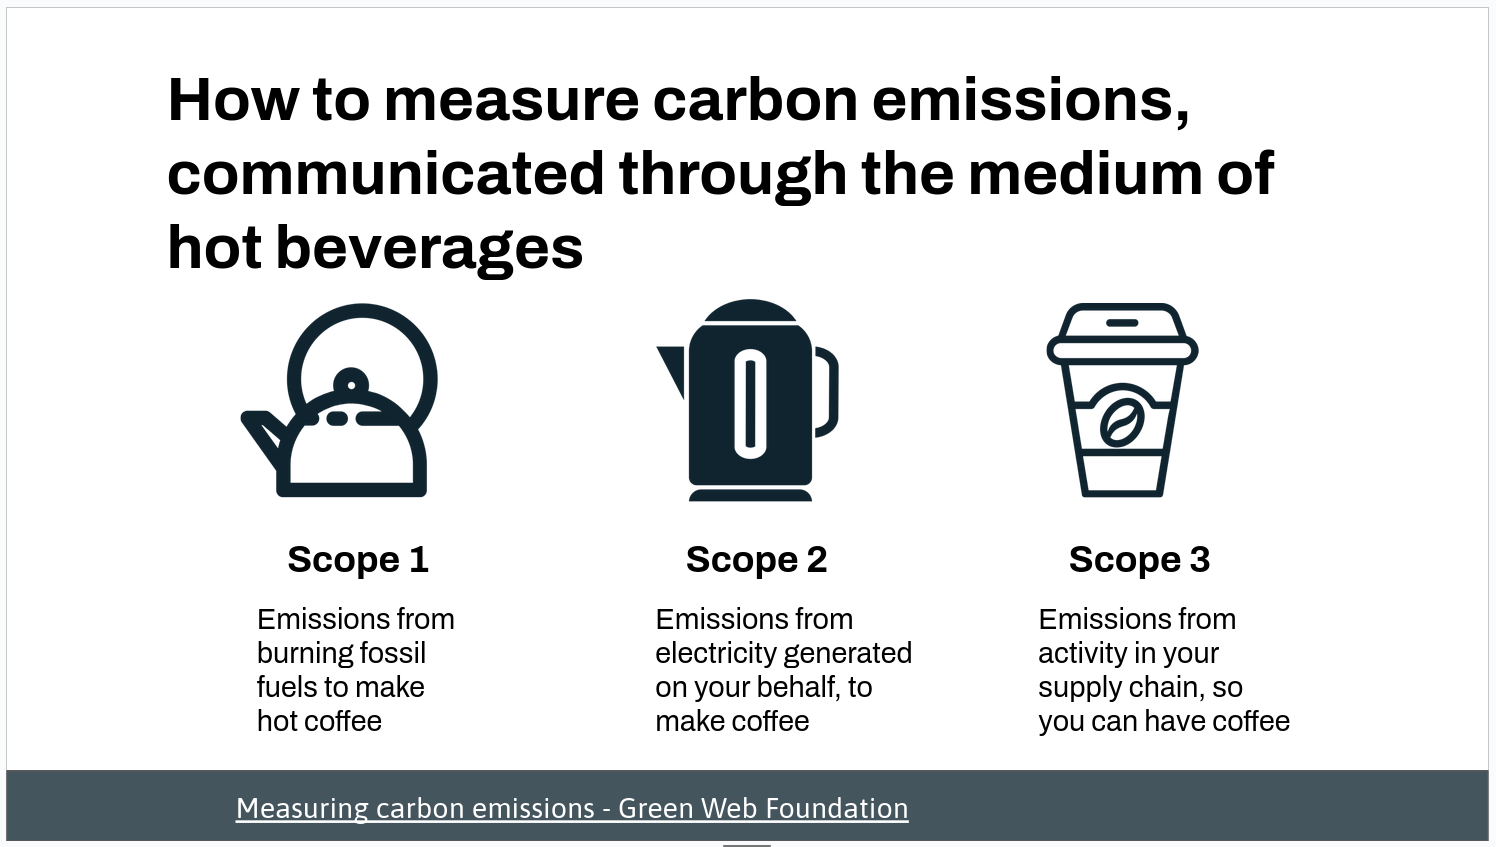 An infographic explaining how to measure carbon emissions communicated through the medium of hot beverages. It’s divided into three sections labeled ‘Scope 1’, ‘Scope 2’, and ‘Scope 3’, each with an icon and a description related to making coffee. The footer reads ‘Measuring carbon emissions - Green Web Foundation’.